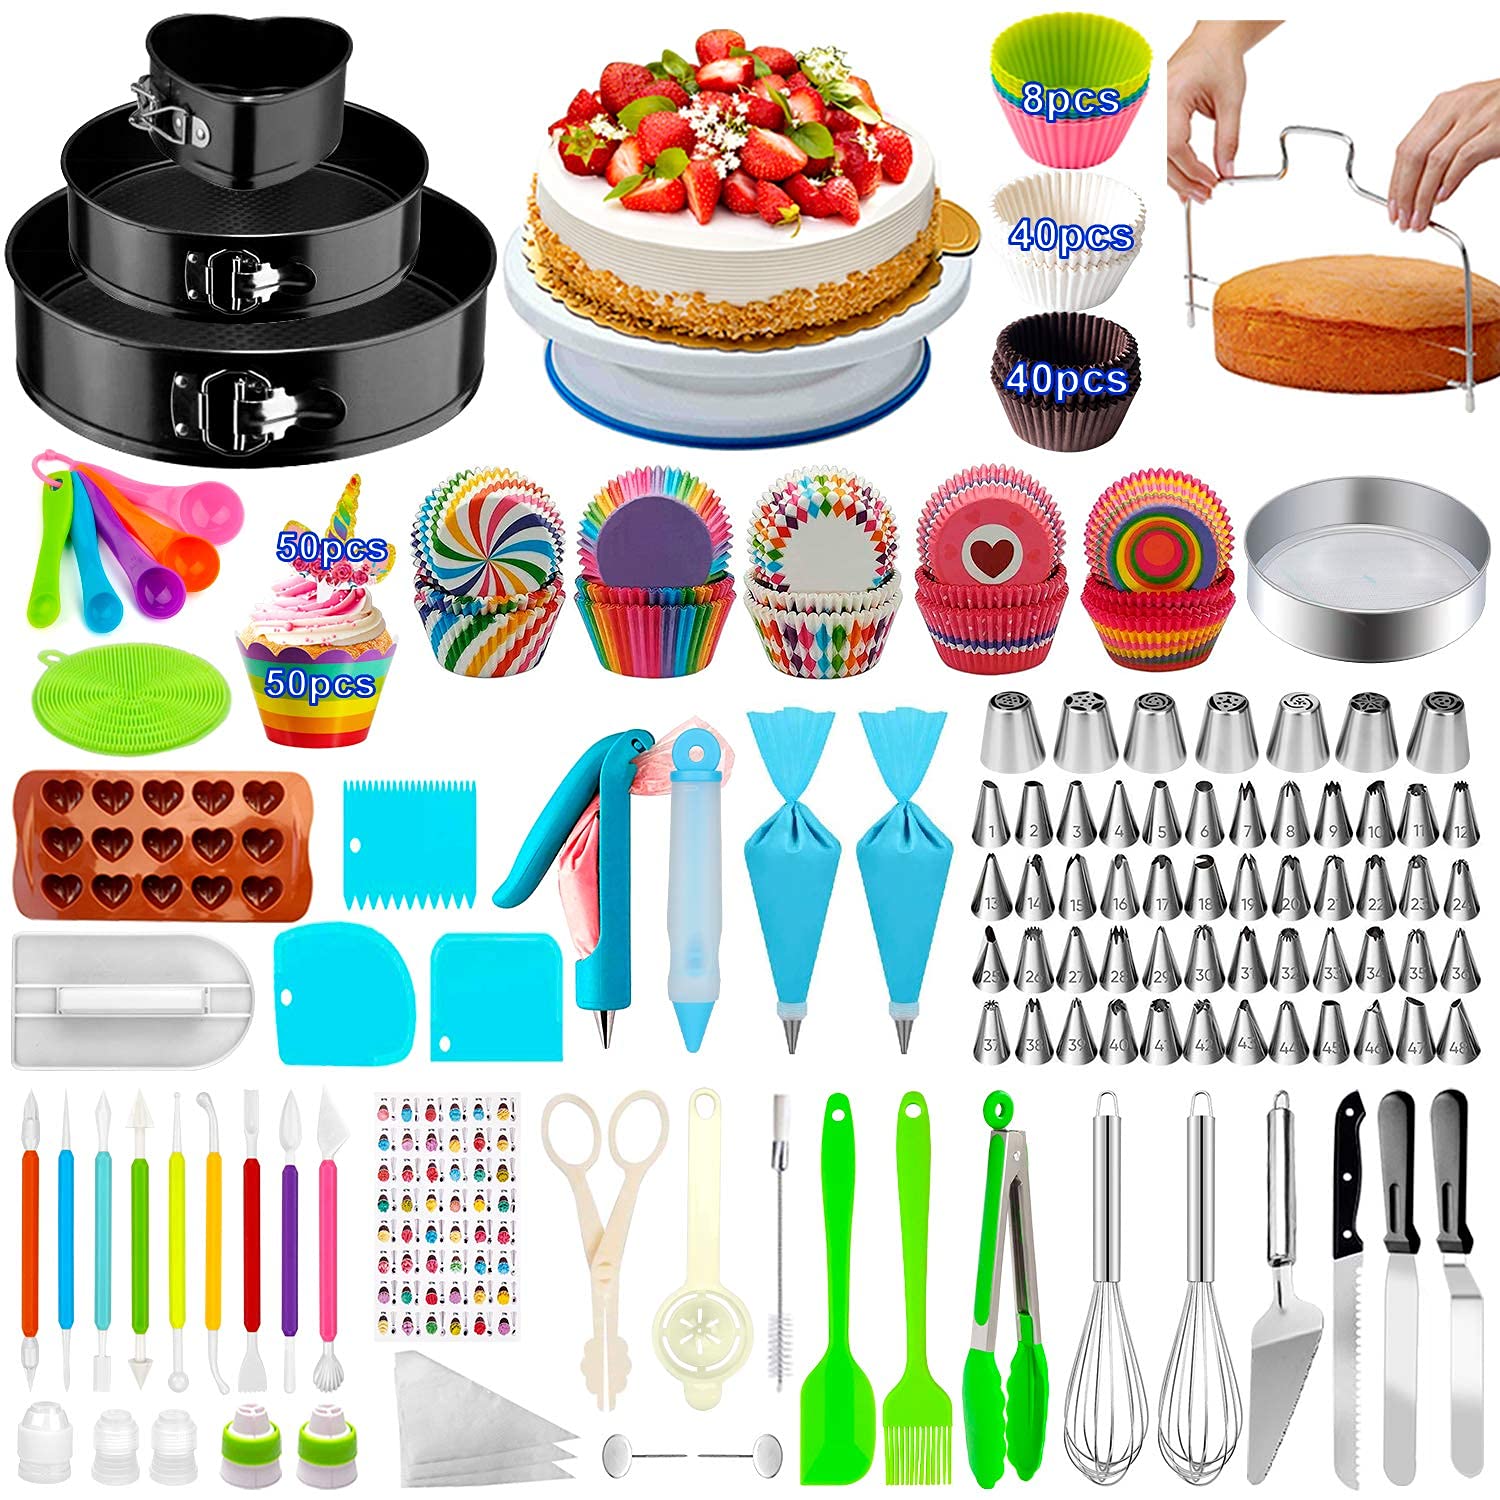 Cake/Pie Lifter - Contacto Bander GmbH - Professional Catering Utensils